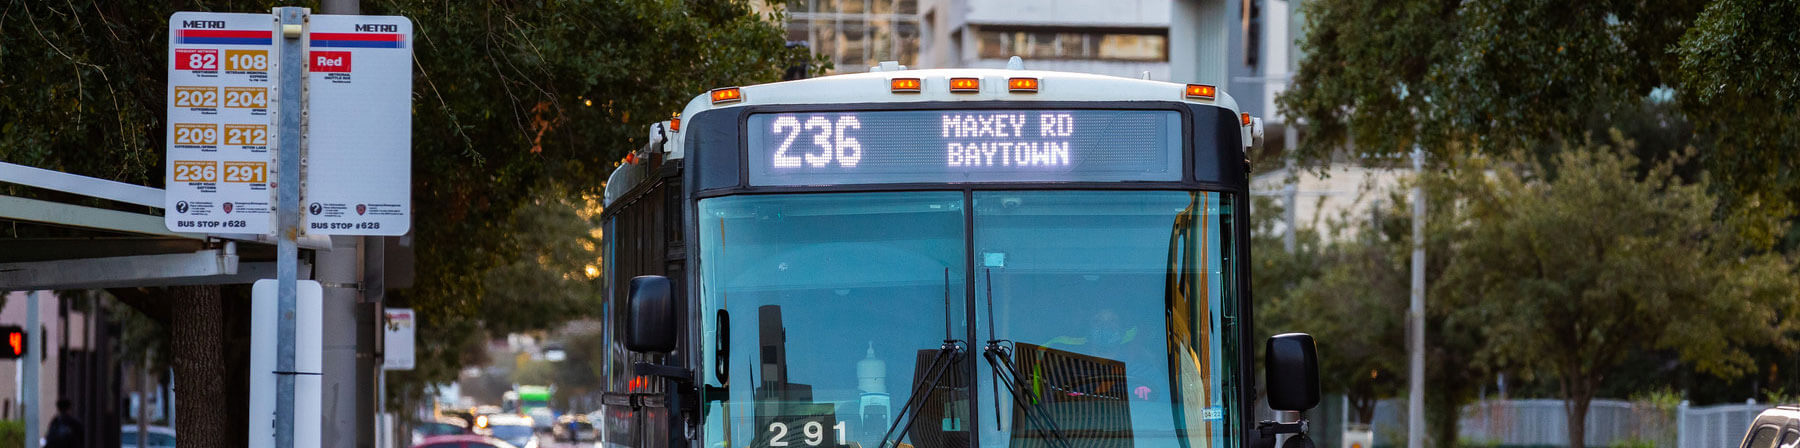 bus route sign